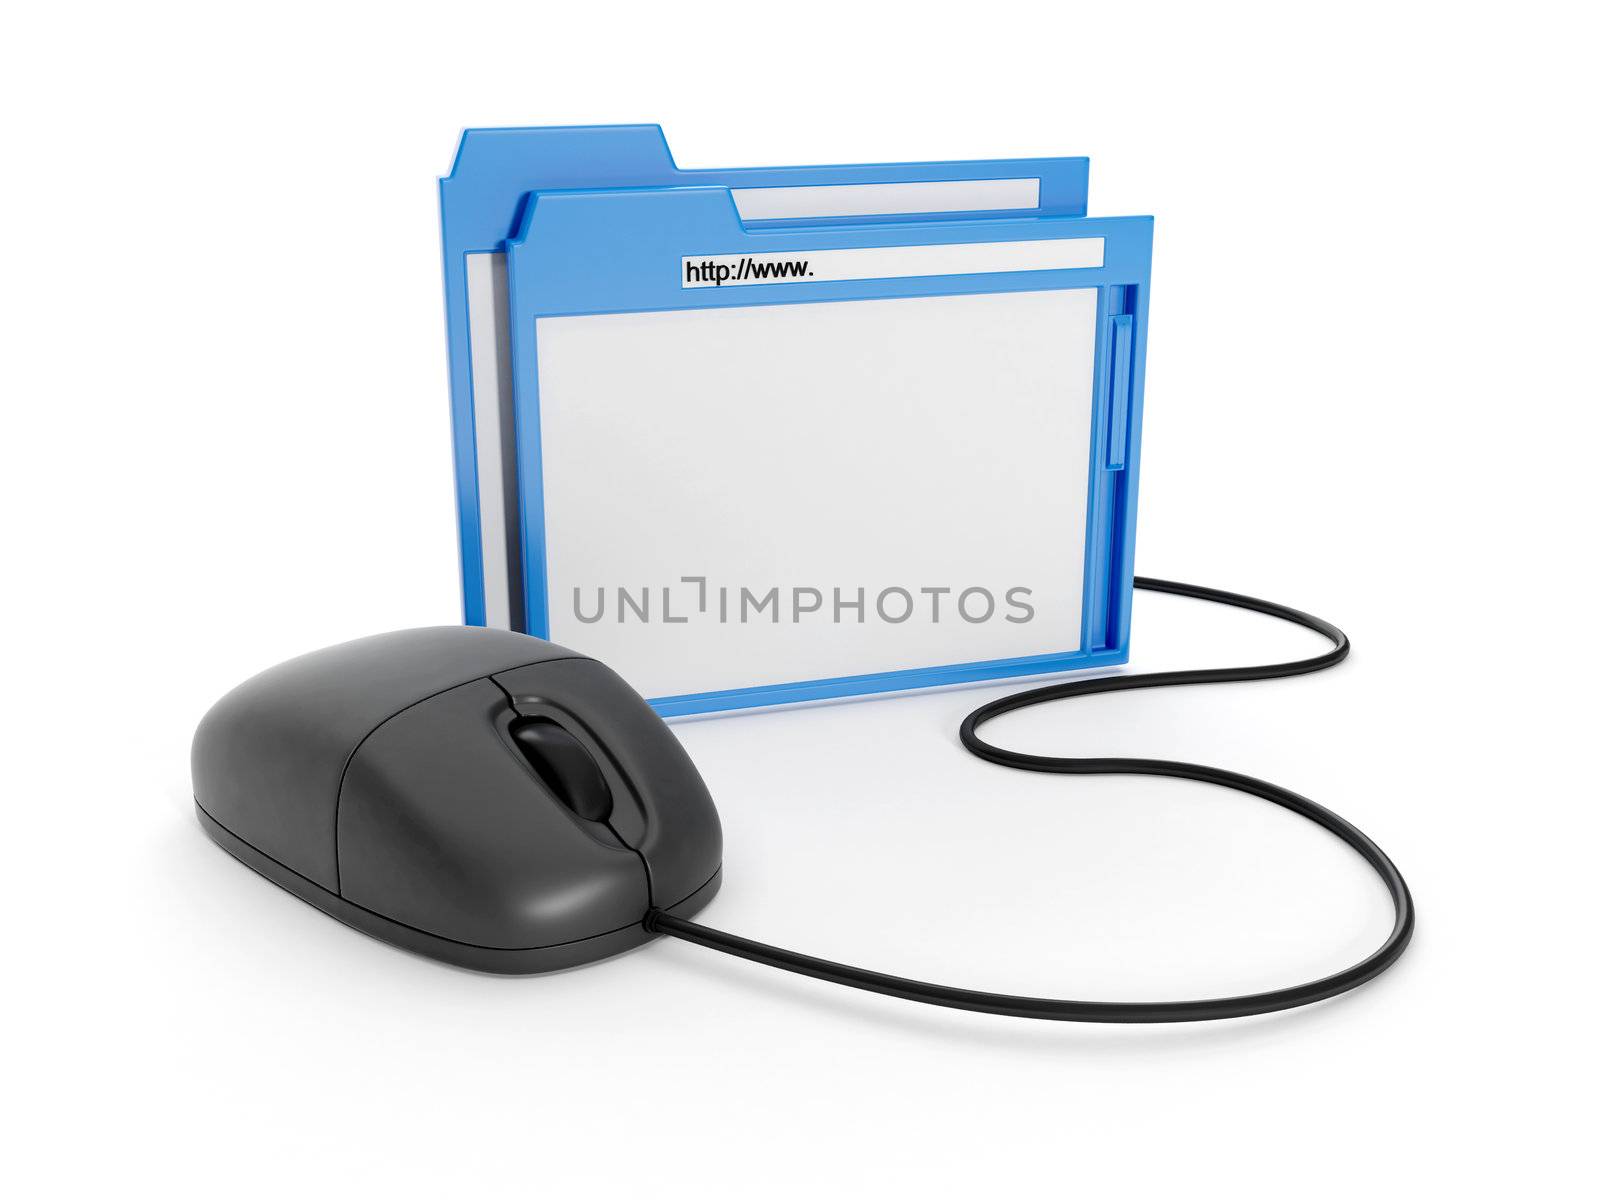 3d illustration: Browser window and the computer mouse on white  by kolobsek